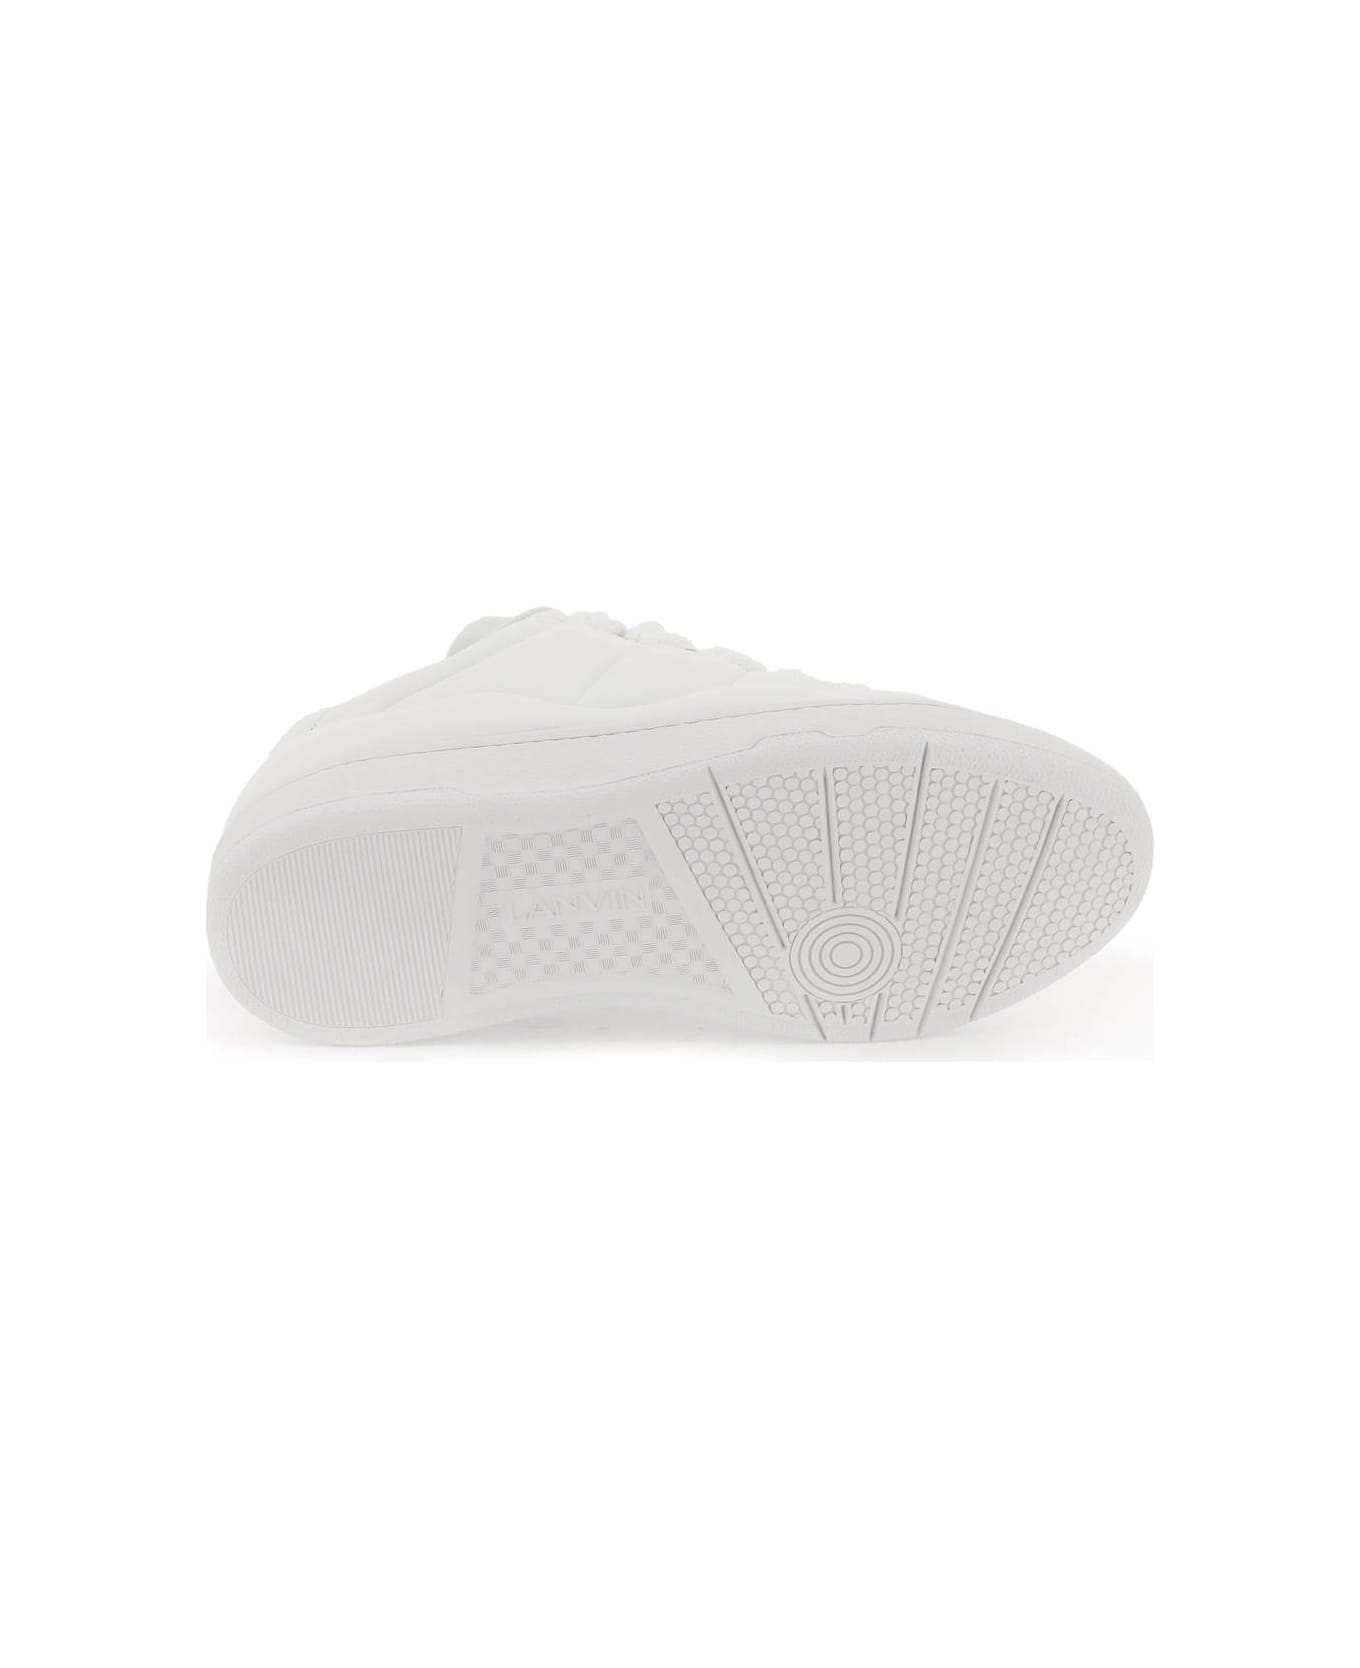 Lanvin Curb Xl Low Top Sneakers - WHITEWHITE スニーカー